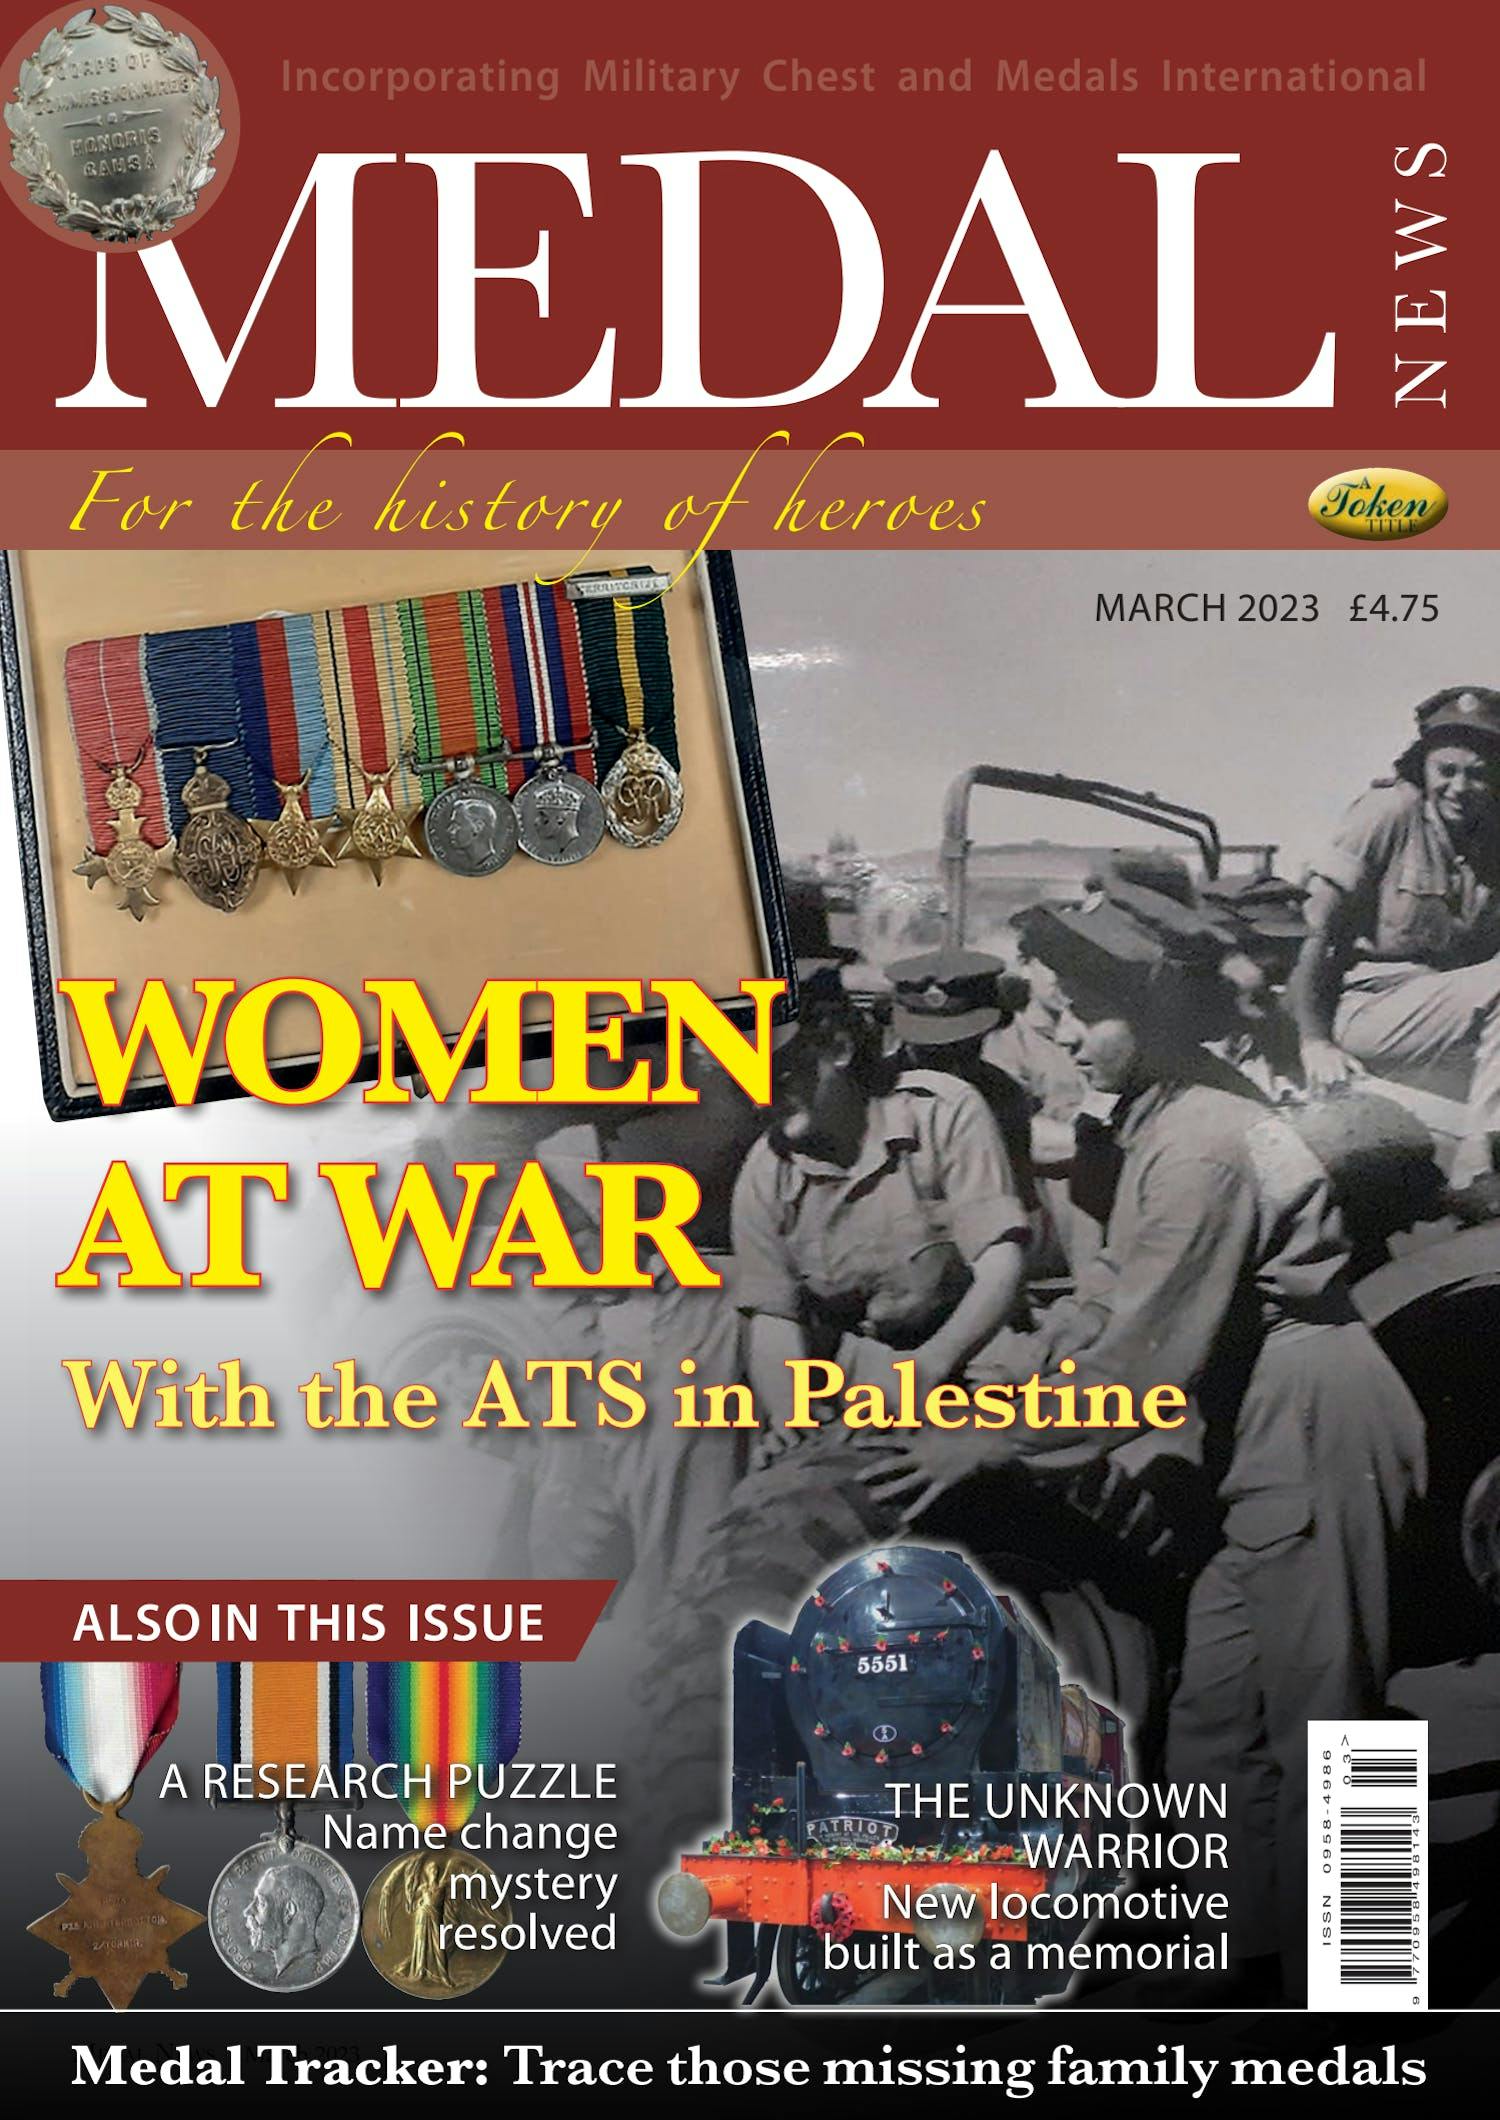 Front cover of 'Women at War', Medal News March 2023, Volume 61, Number 3 by Token Publishing